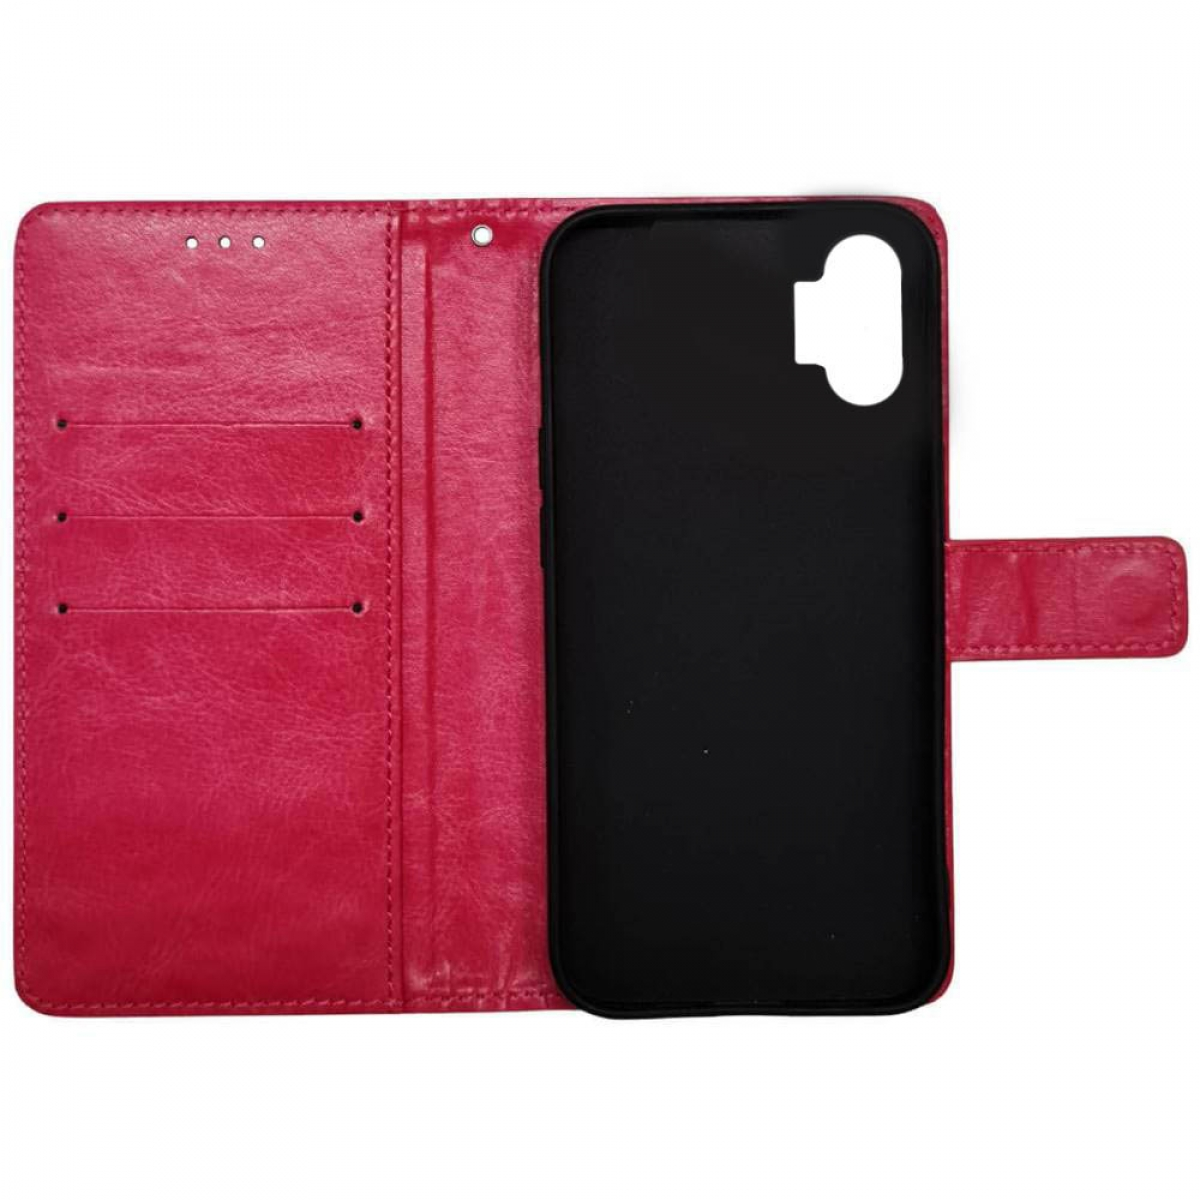 Phone Klappbare, Rosa Nothing, Bookcover, CASEONLINE 1,